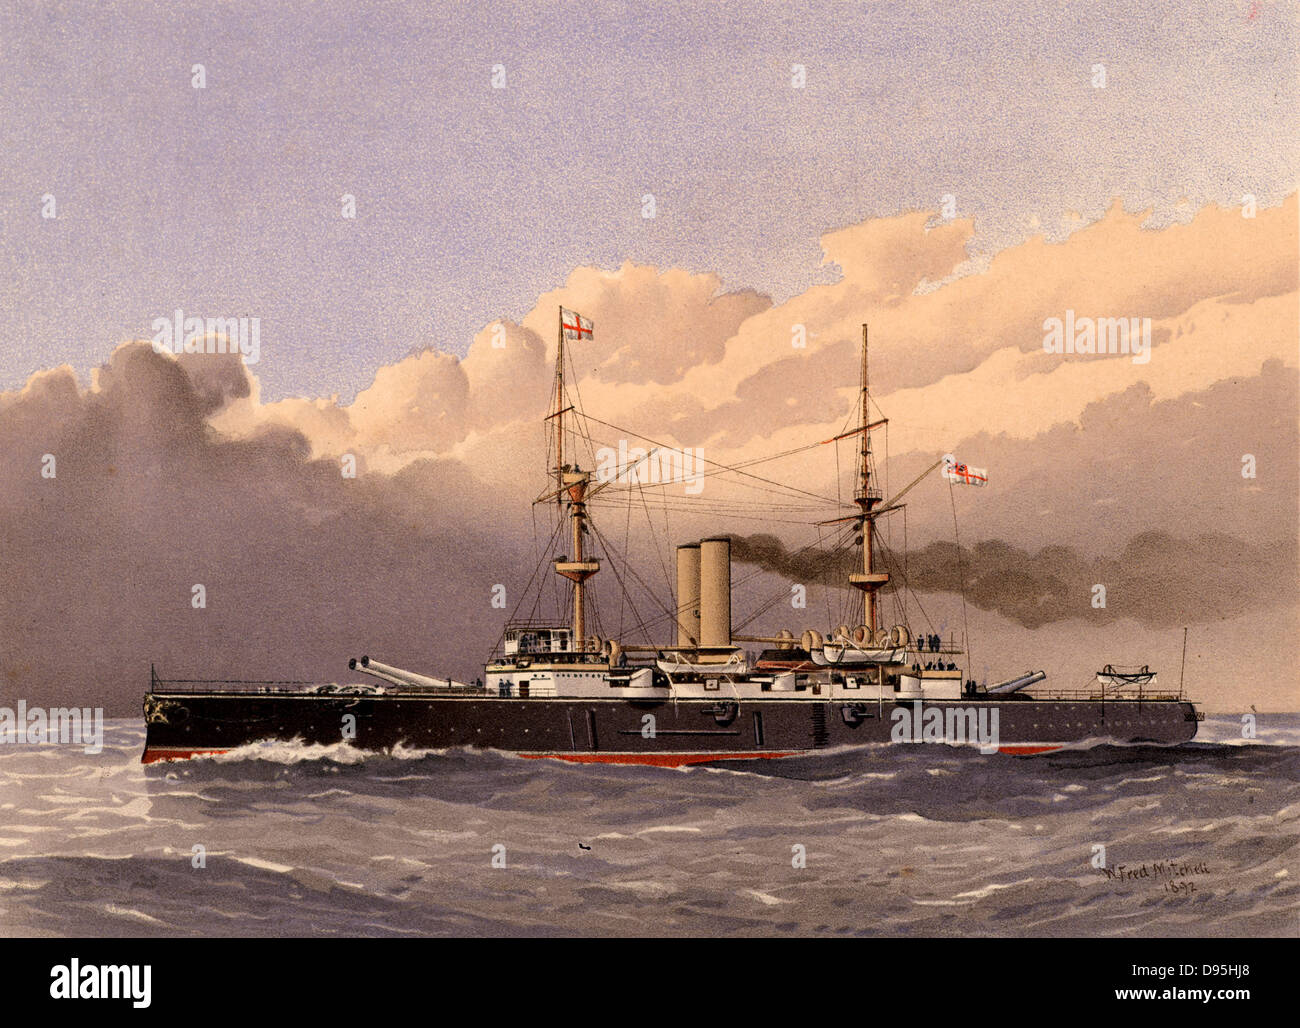 HMS Royal Sovereign, British lst class battleship.  Laid down 26 February 1891. Commissioned 31 May 1892. Sold for scrap 7 October 1913.  Illustration by William Frederick Mitchell. Lithograph 1892. Stock Photo